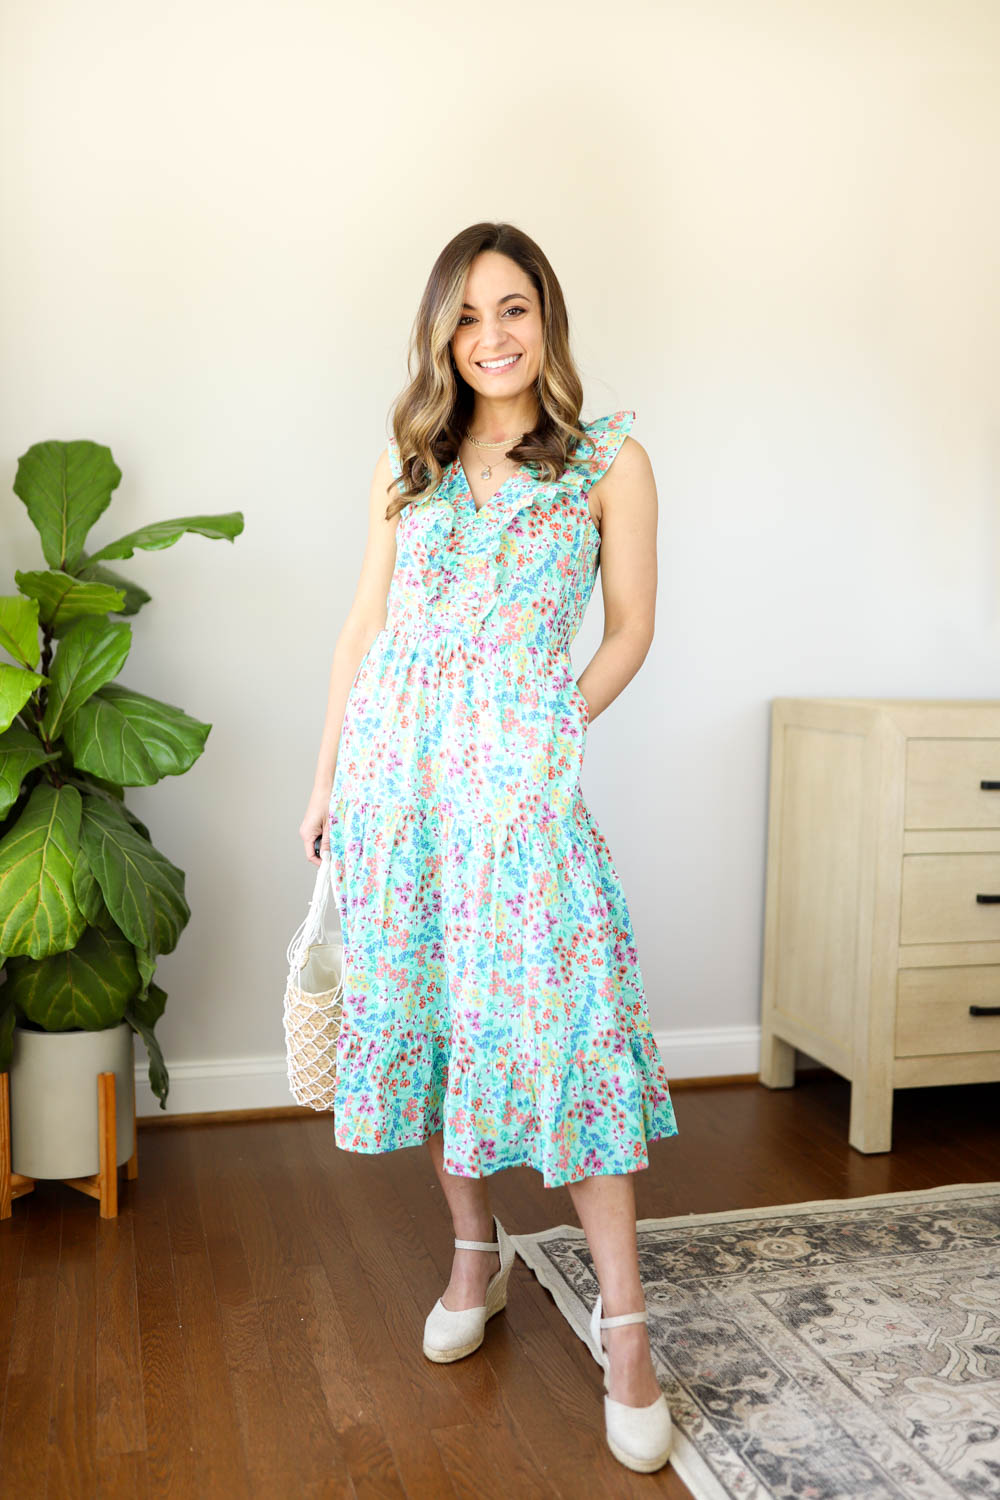 Floral dresses for spring and summer via petite style blog Pumps and Push-Ups | floral dress | petite fashion | petite blogger 